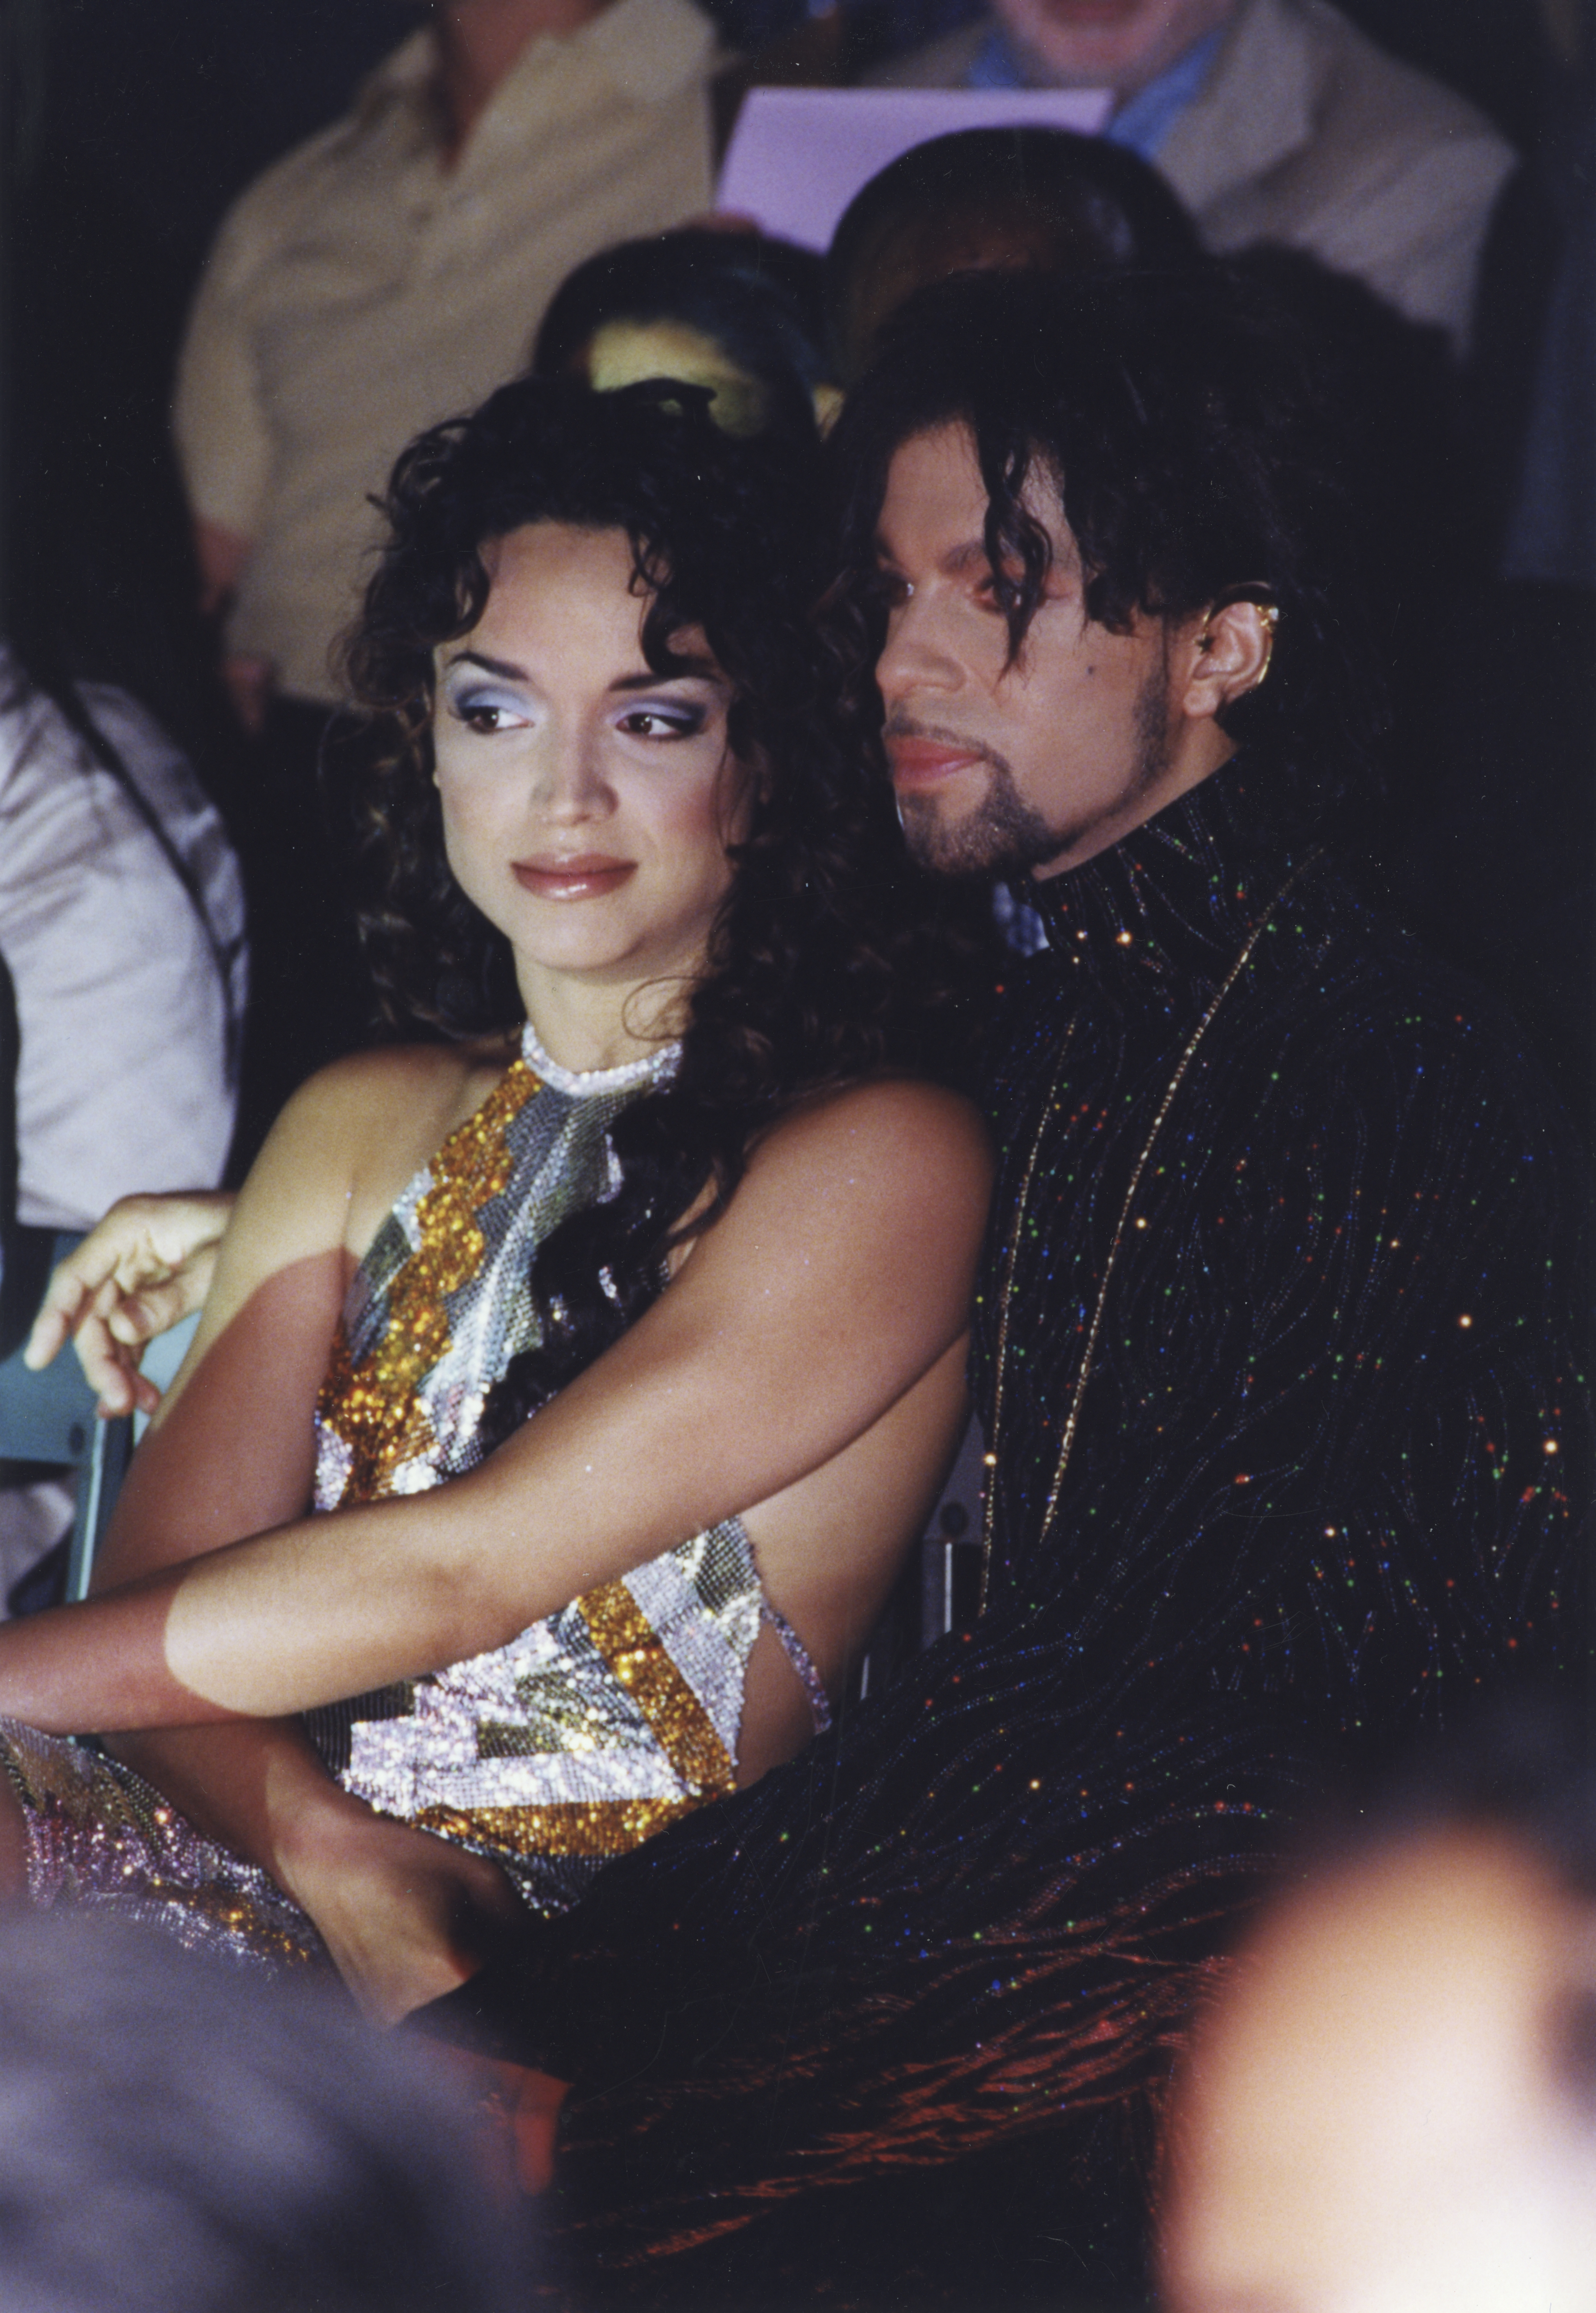 Prince and Mayte Garcia in Paris, France on July 15, 1999 | Source: Getty Images